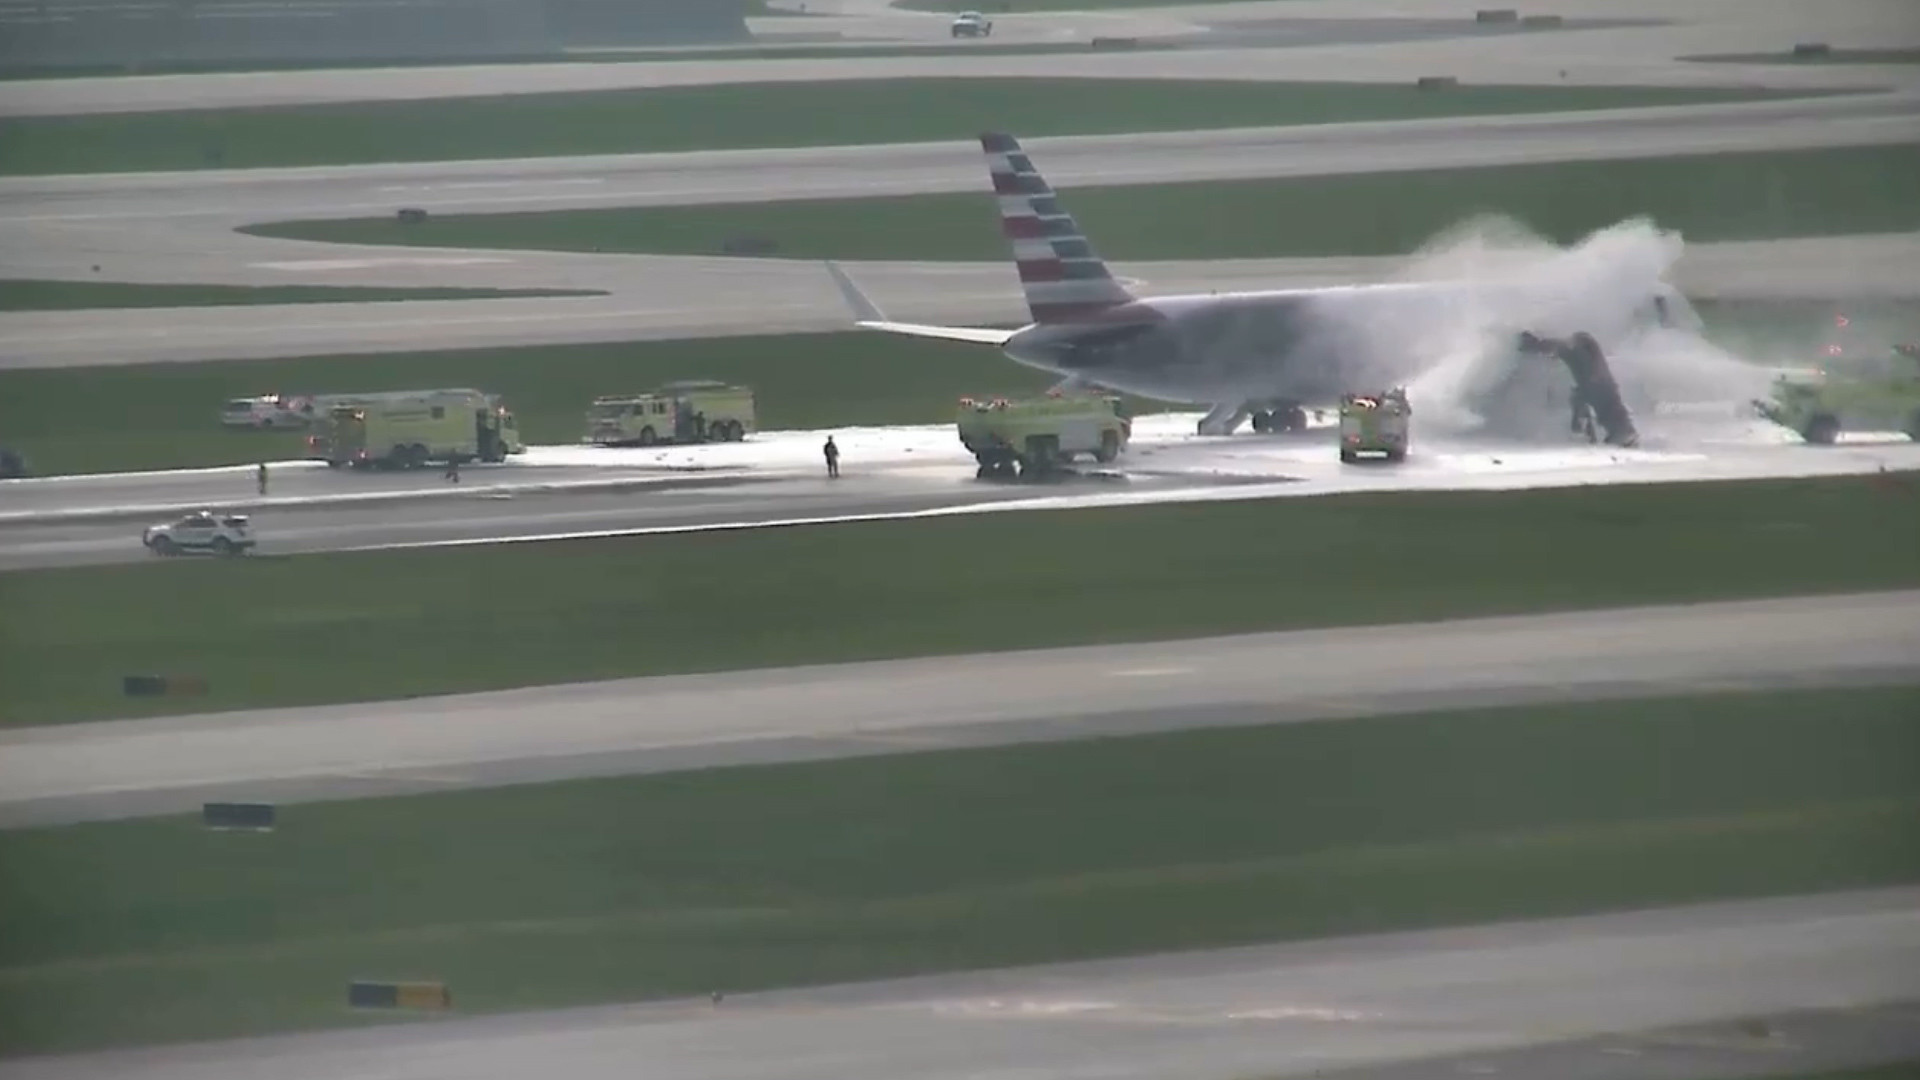 Newly released video shows plane's engine exploding on O'Hare runway